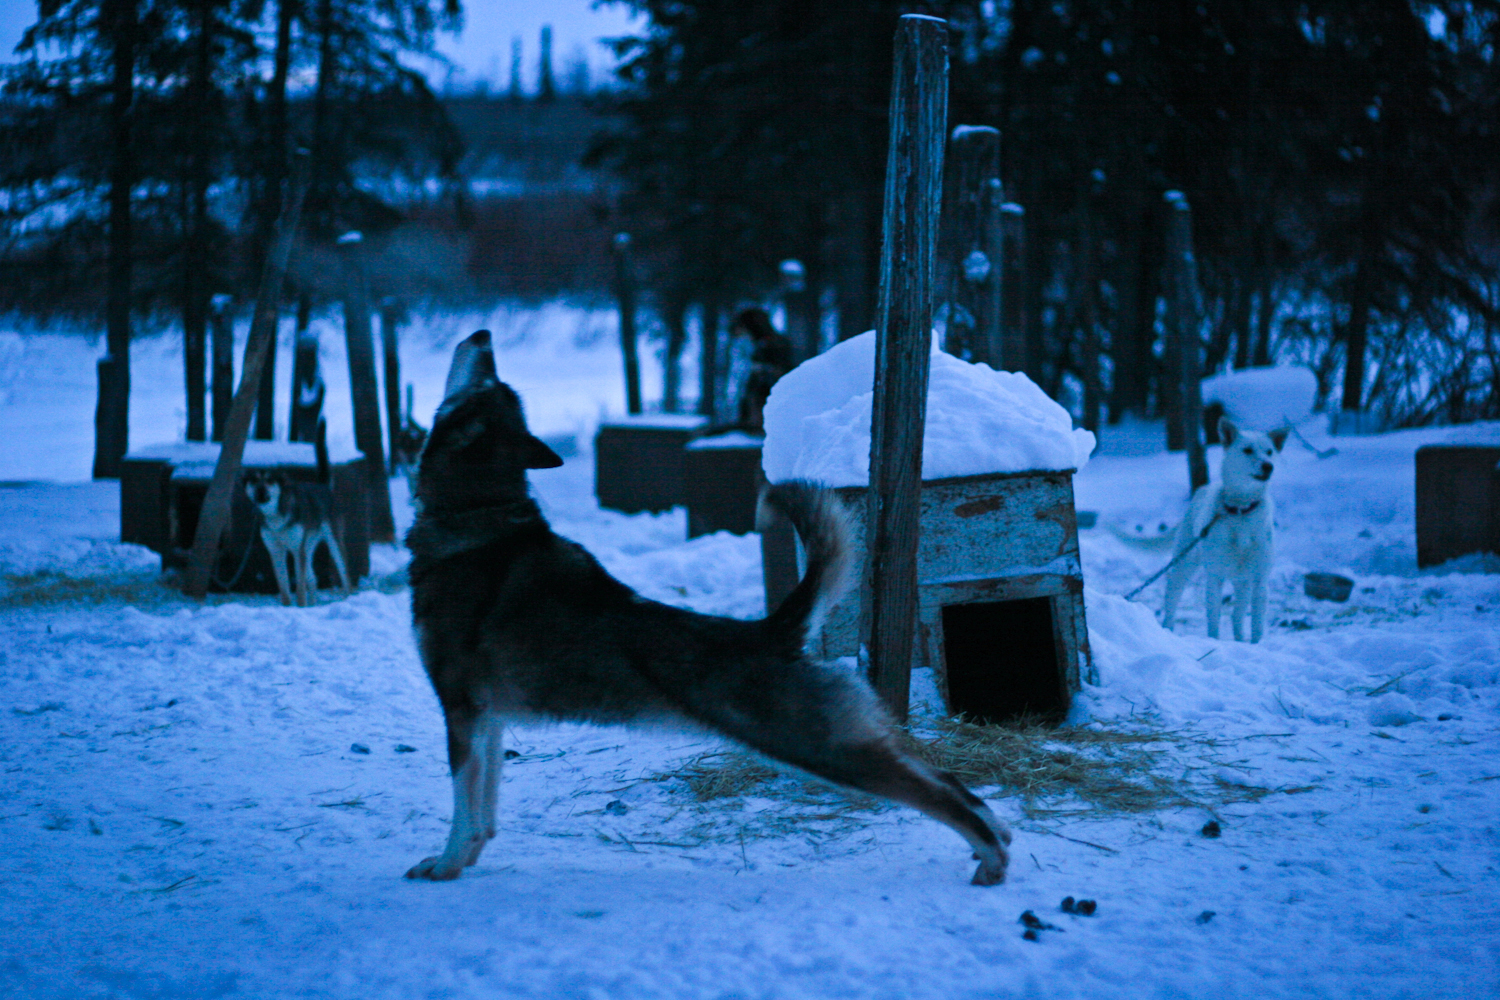   One of the Osborne's huskies stretches in the afternoon twilight. Once snow machines were introduced in the 70's most families disbanded their teams. "Sometimes it's like heaven out there" said Barbara, "and other times its hell, they get all tangl